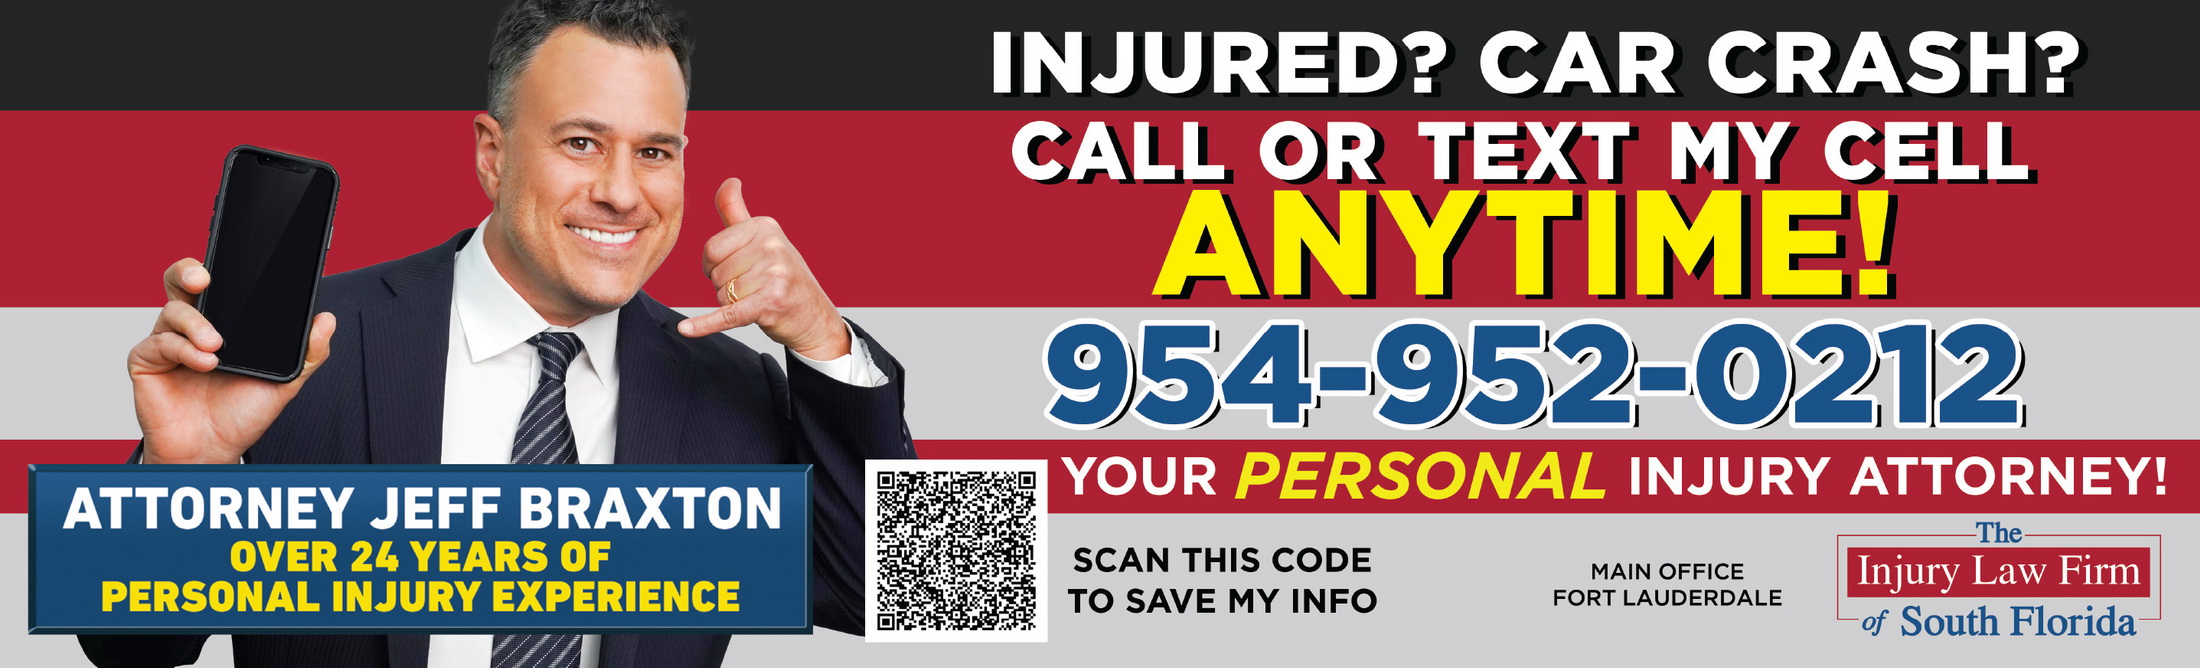 Injury Law Firm Of South Florida 1 Injury Law Firm of South Florida